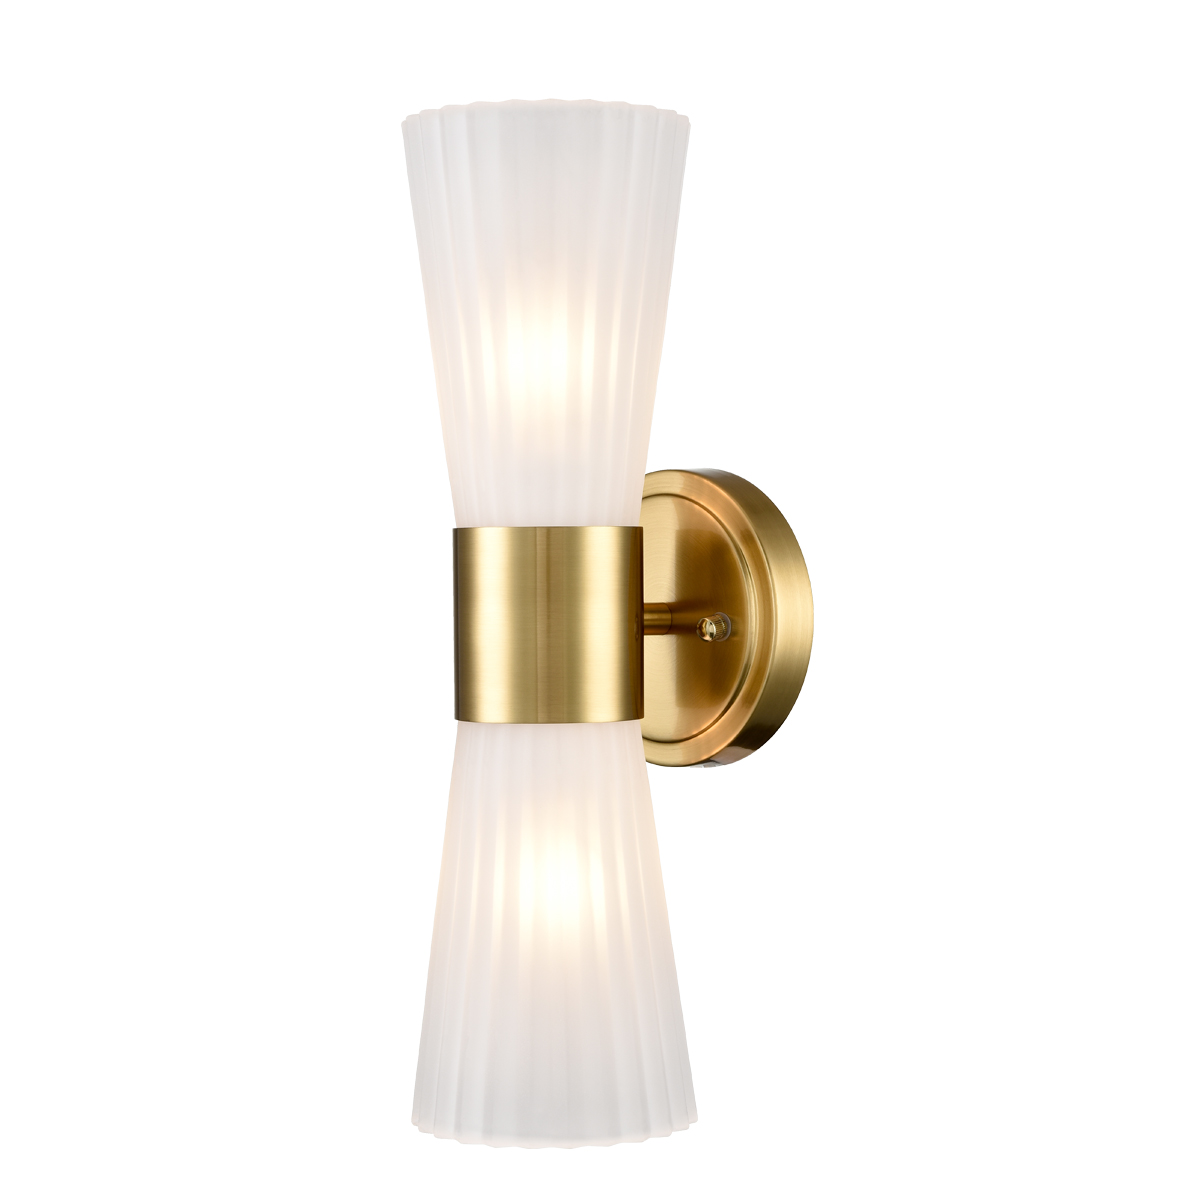 Modern Wall Vanity Light Fixture Gold Wall Sconce, Adjustable Direction Up Down